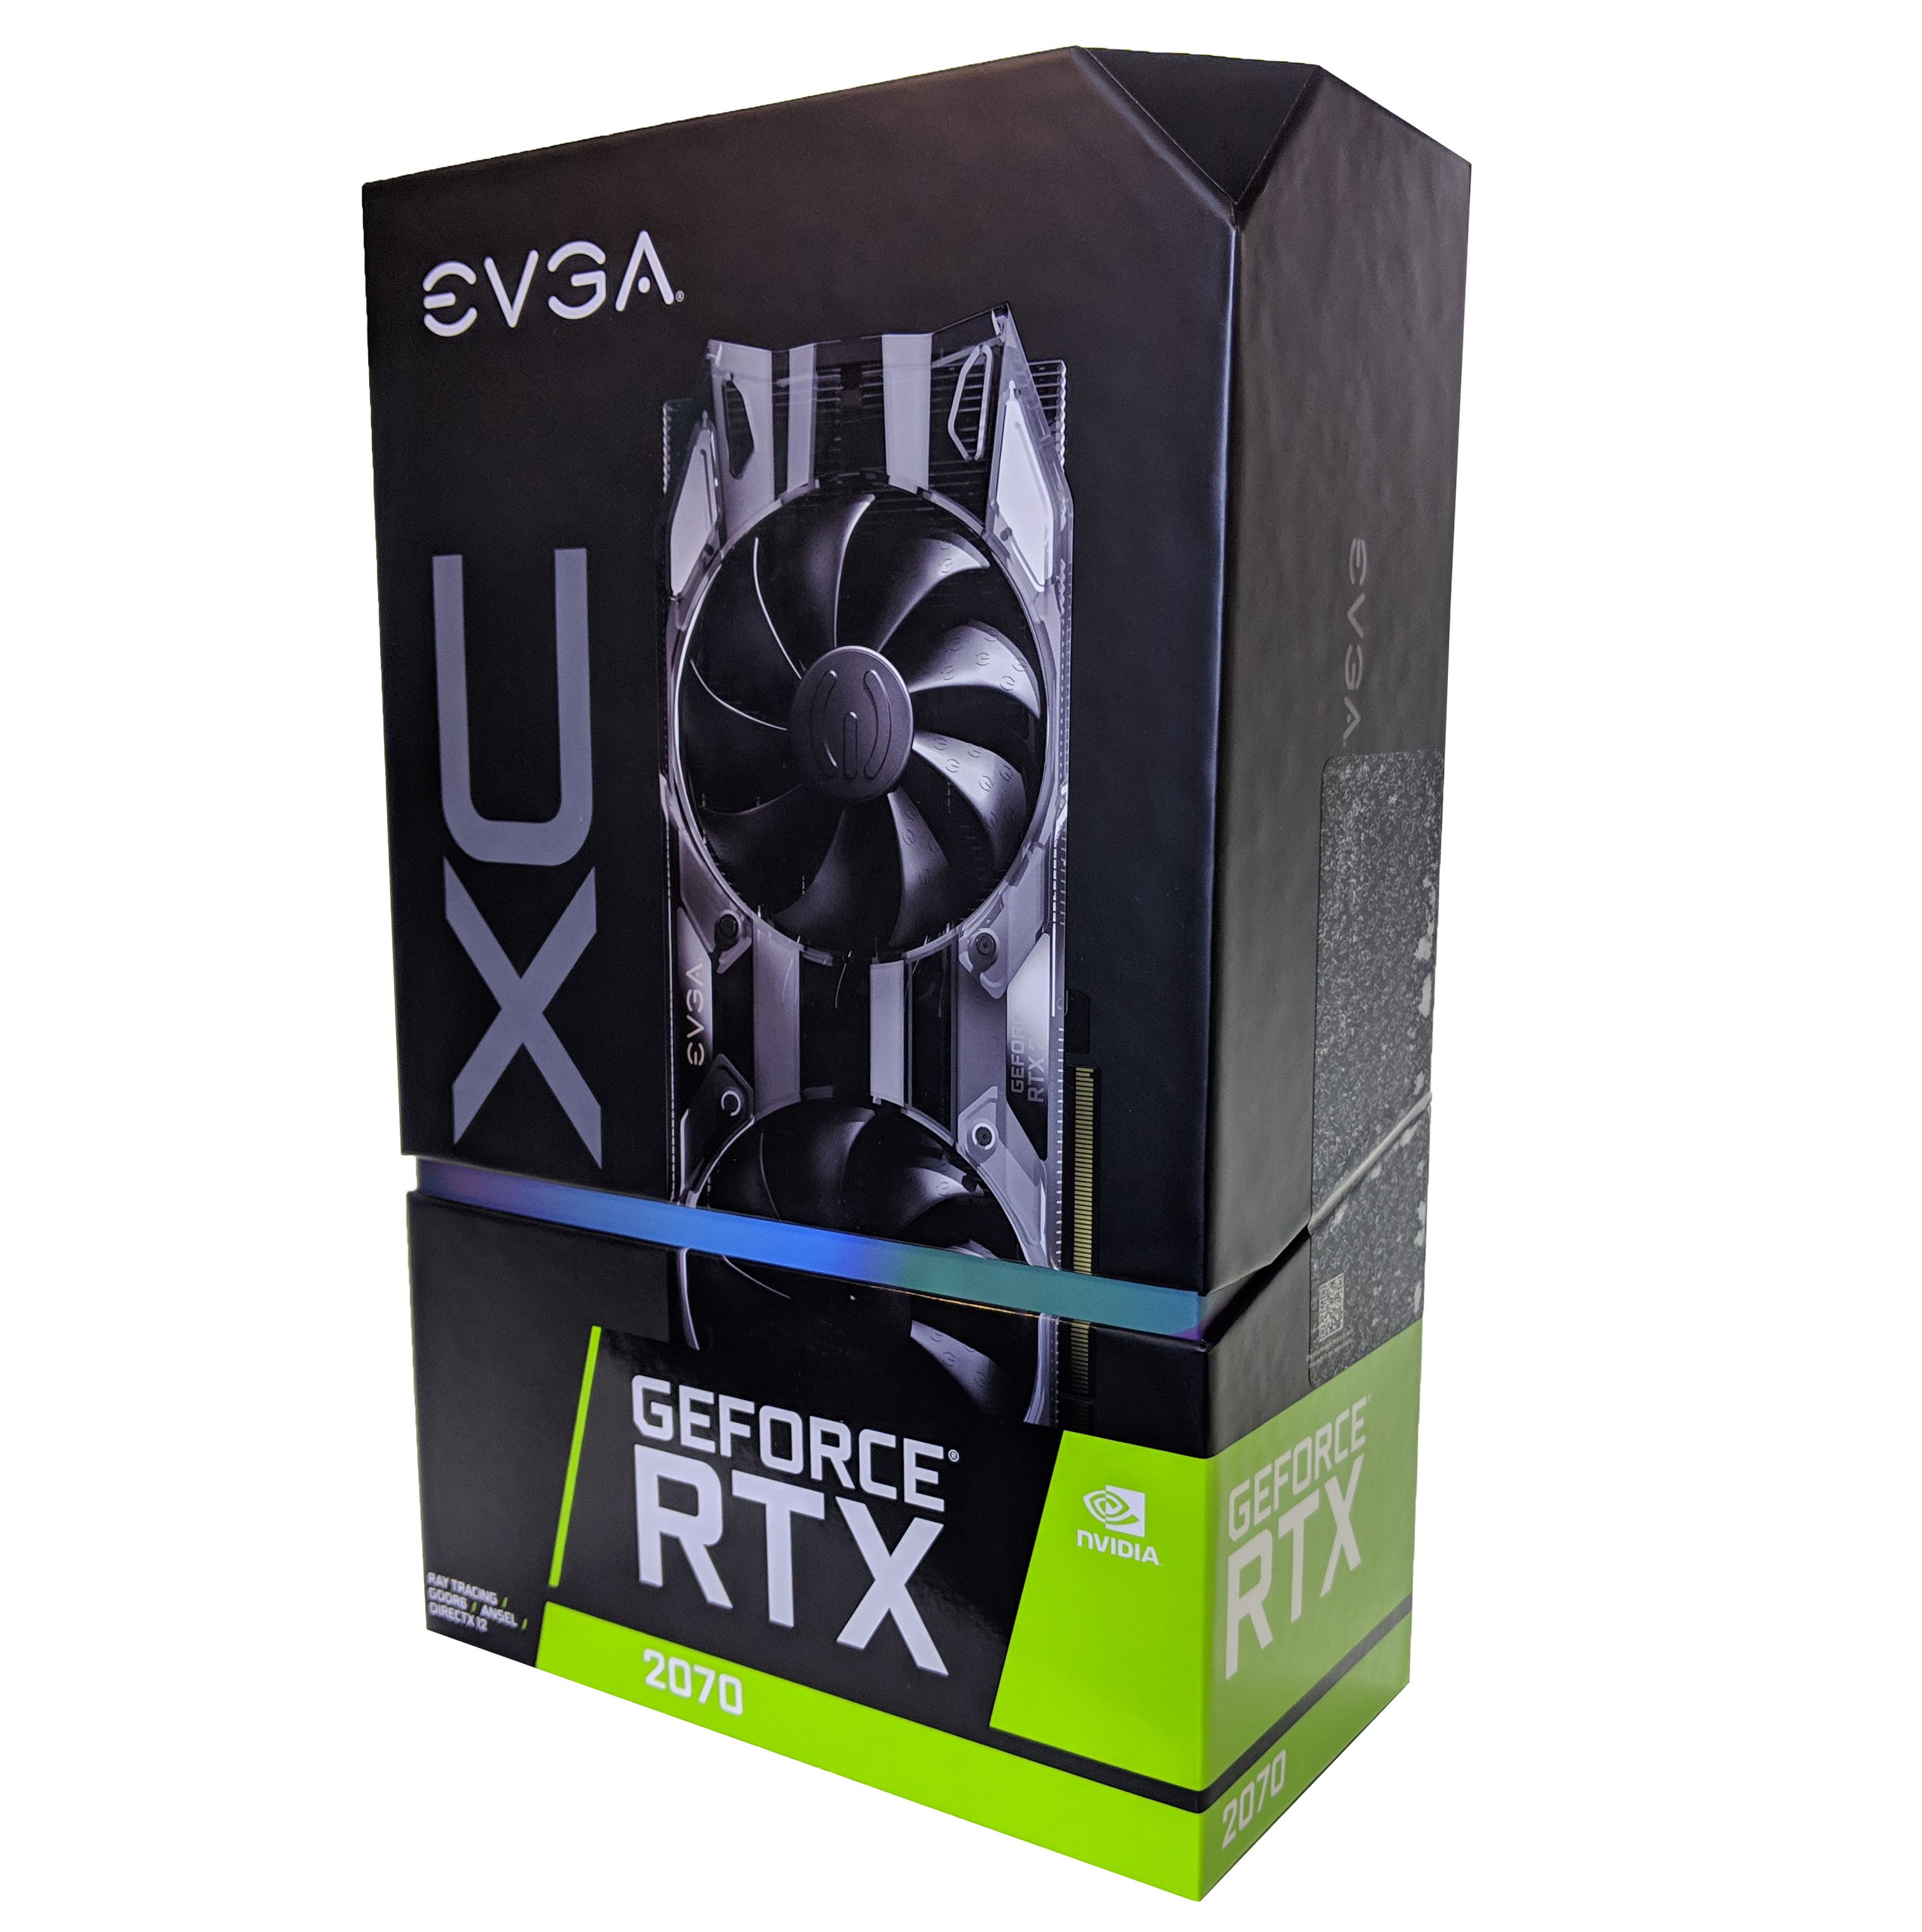 EVGA RTX 2070 Gaming Graphics Card Review – GND-Tech